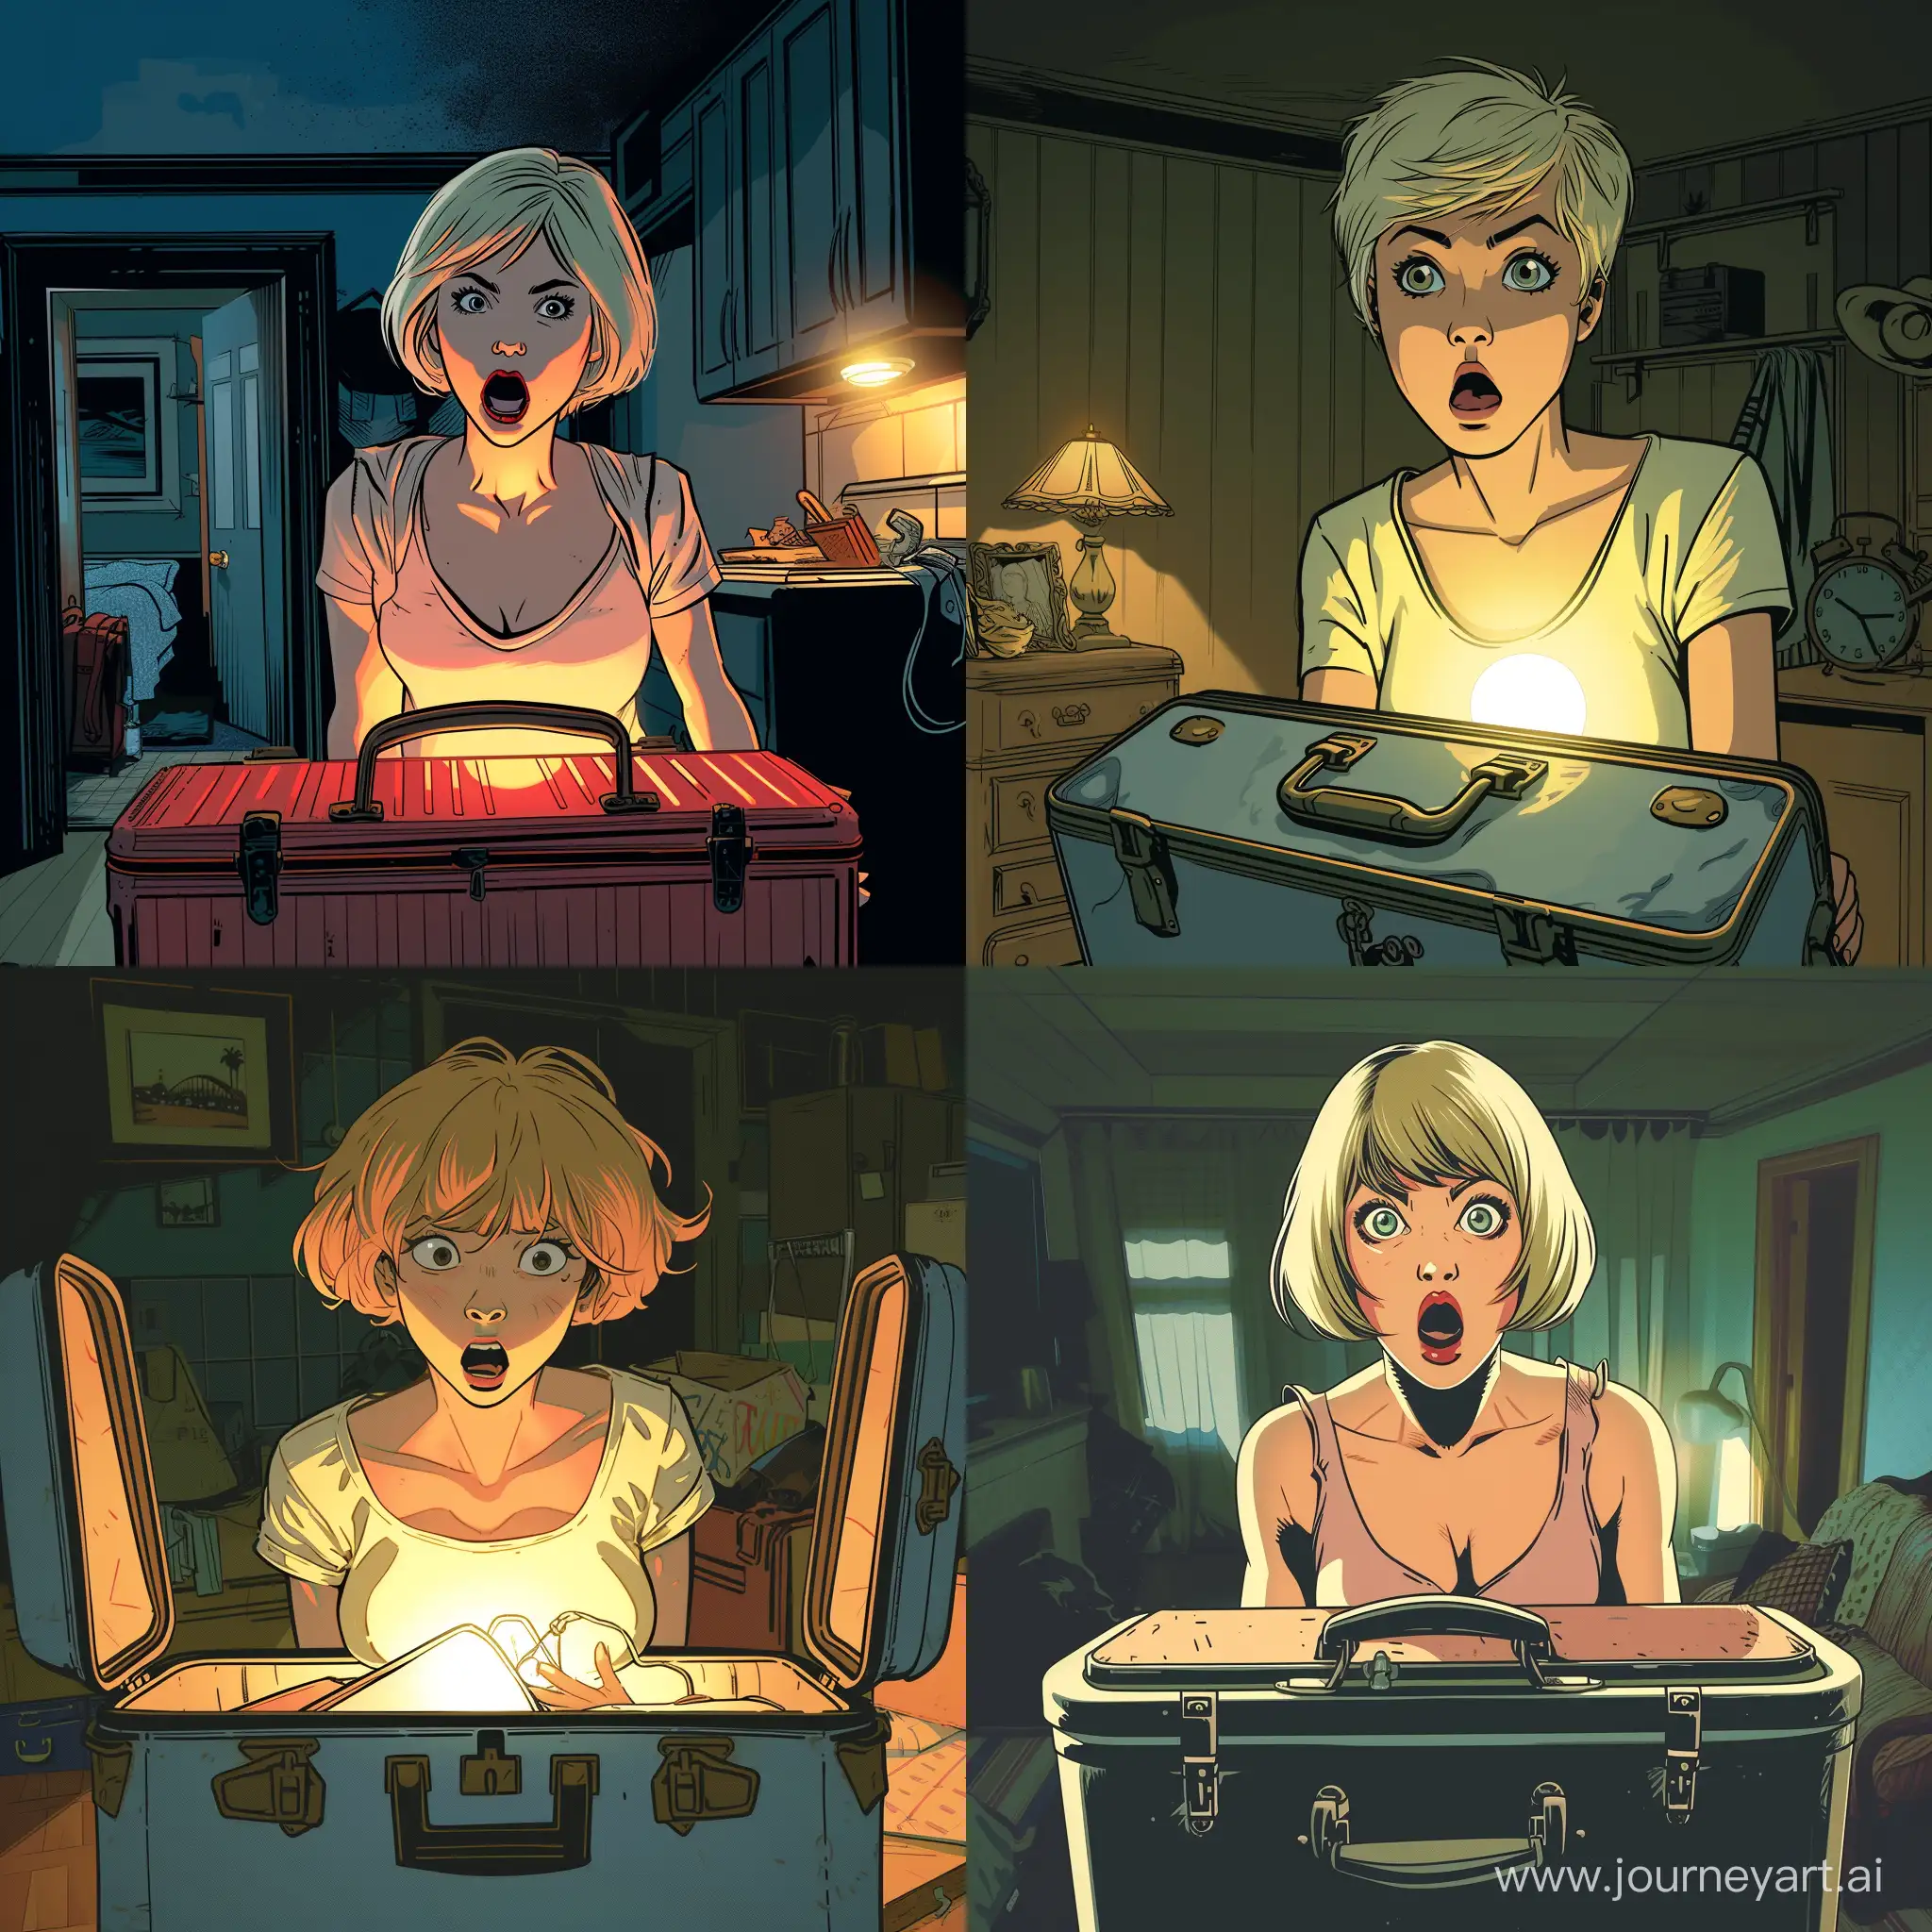 A girl with short blond hair at home, she is shocked when opened the suitcase, room has little lighting, modern american comic book style.
